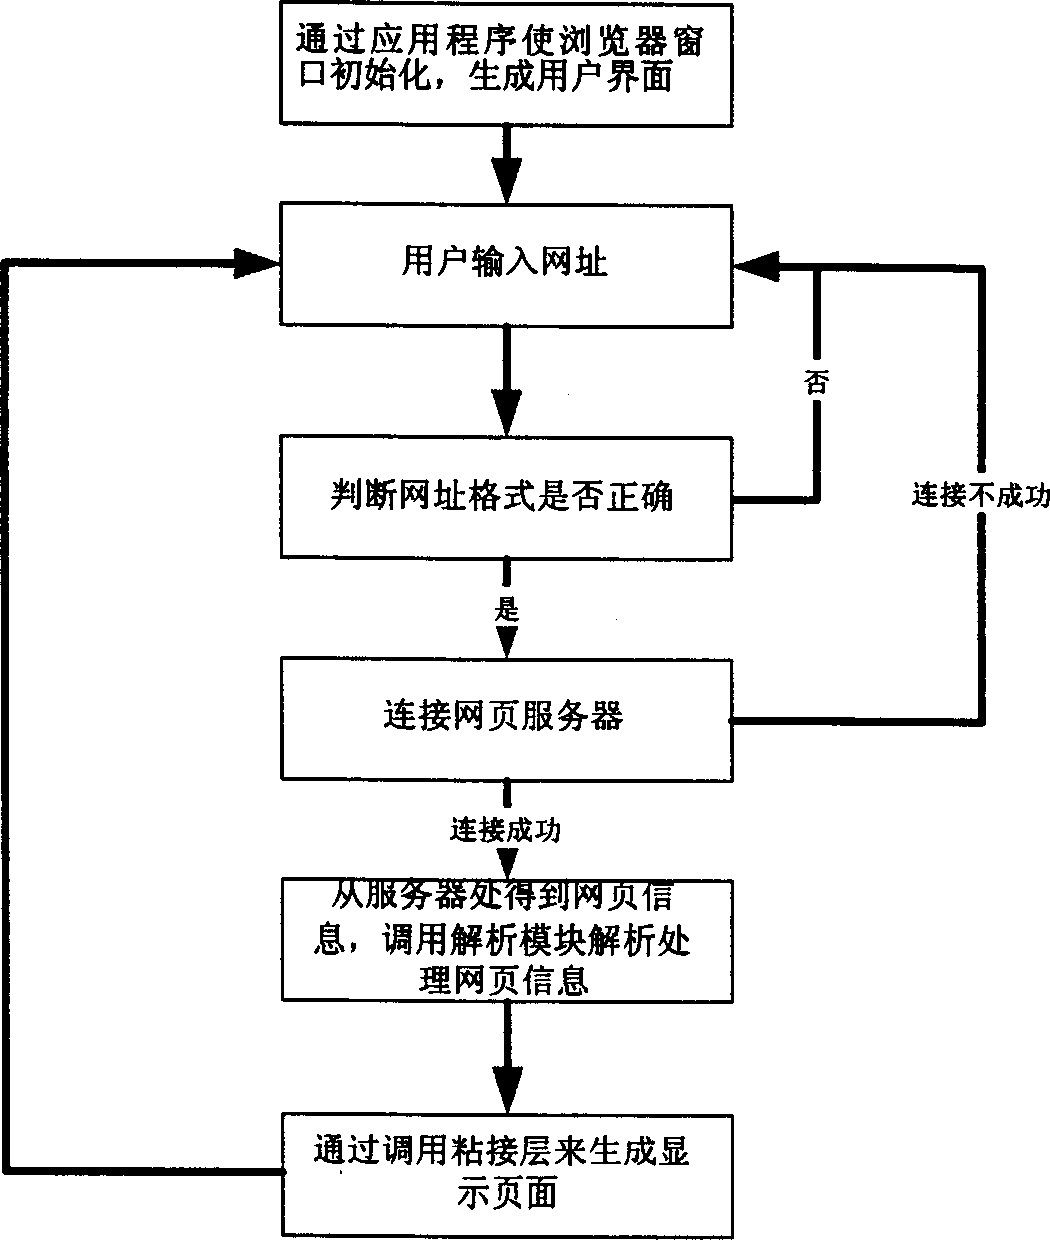 Webpage browsing method for embedded facilities